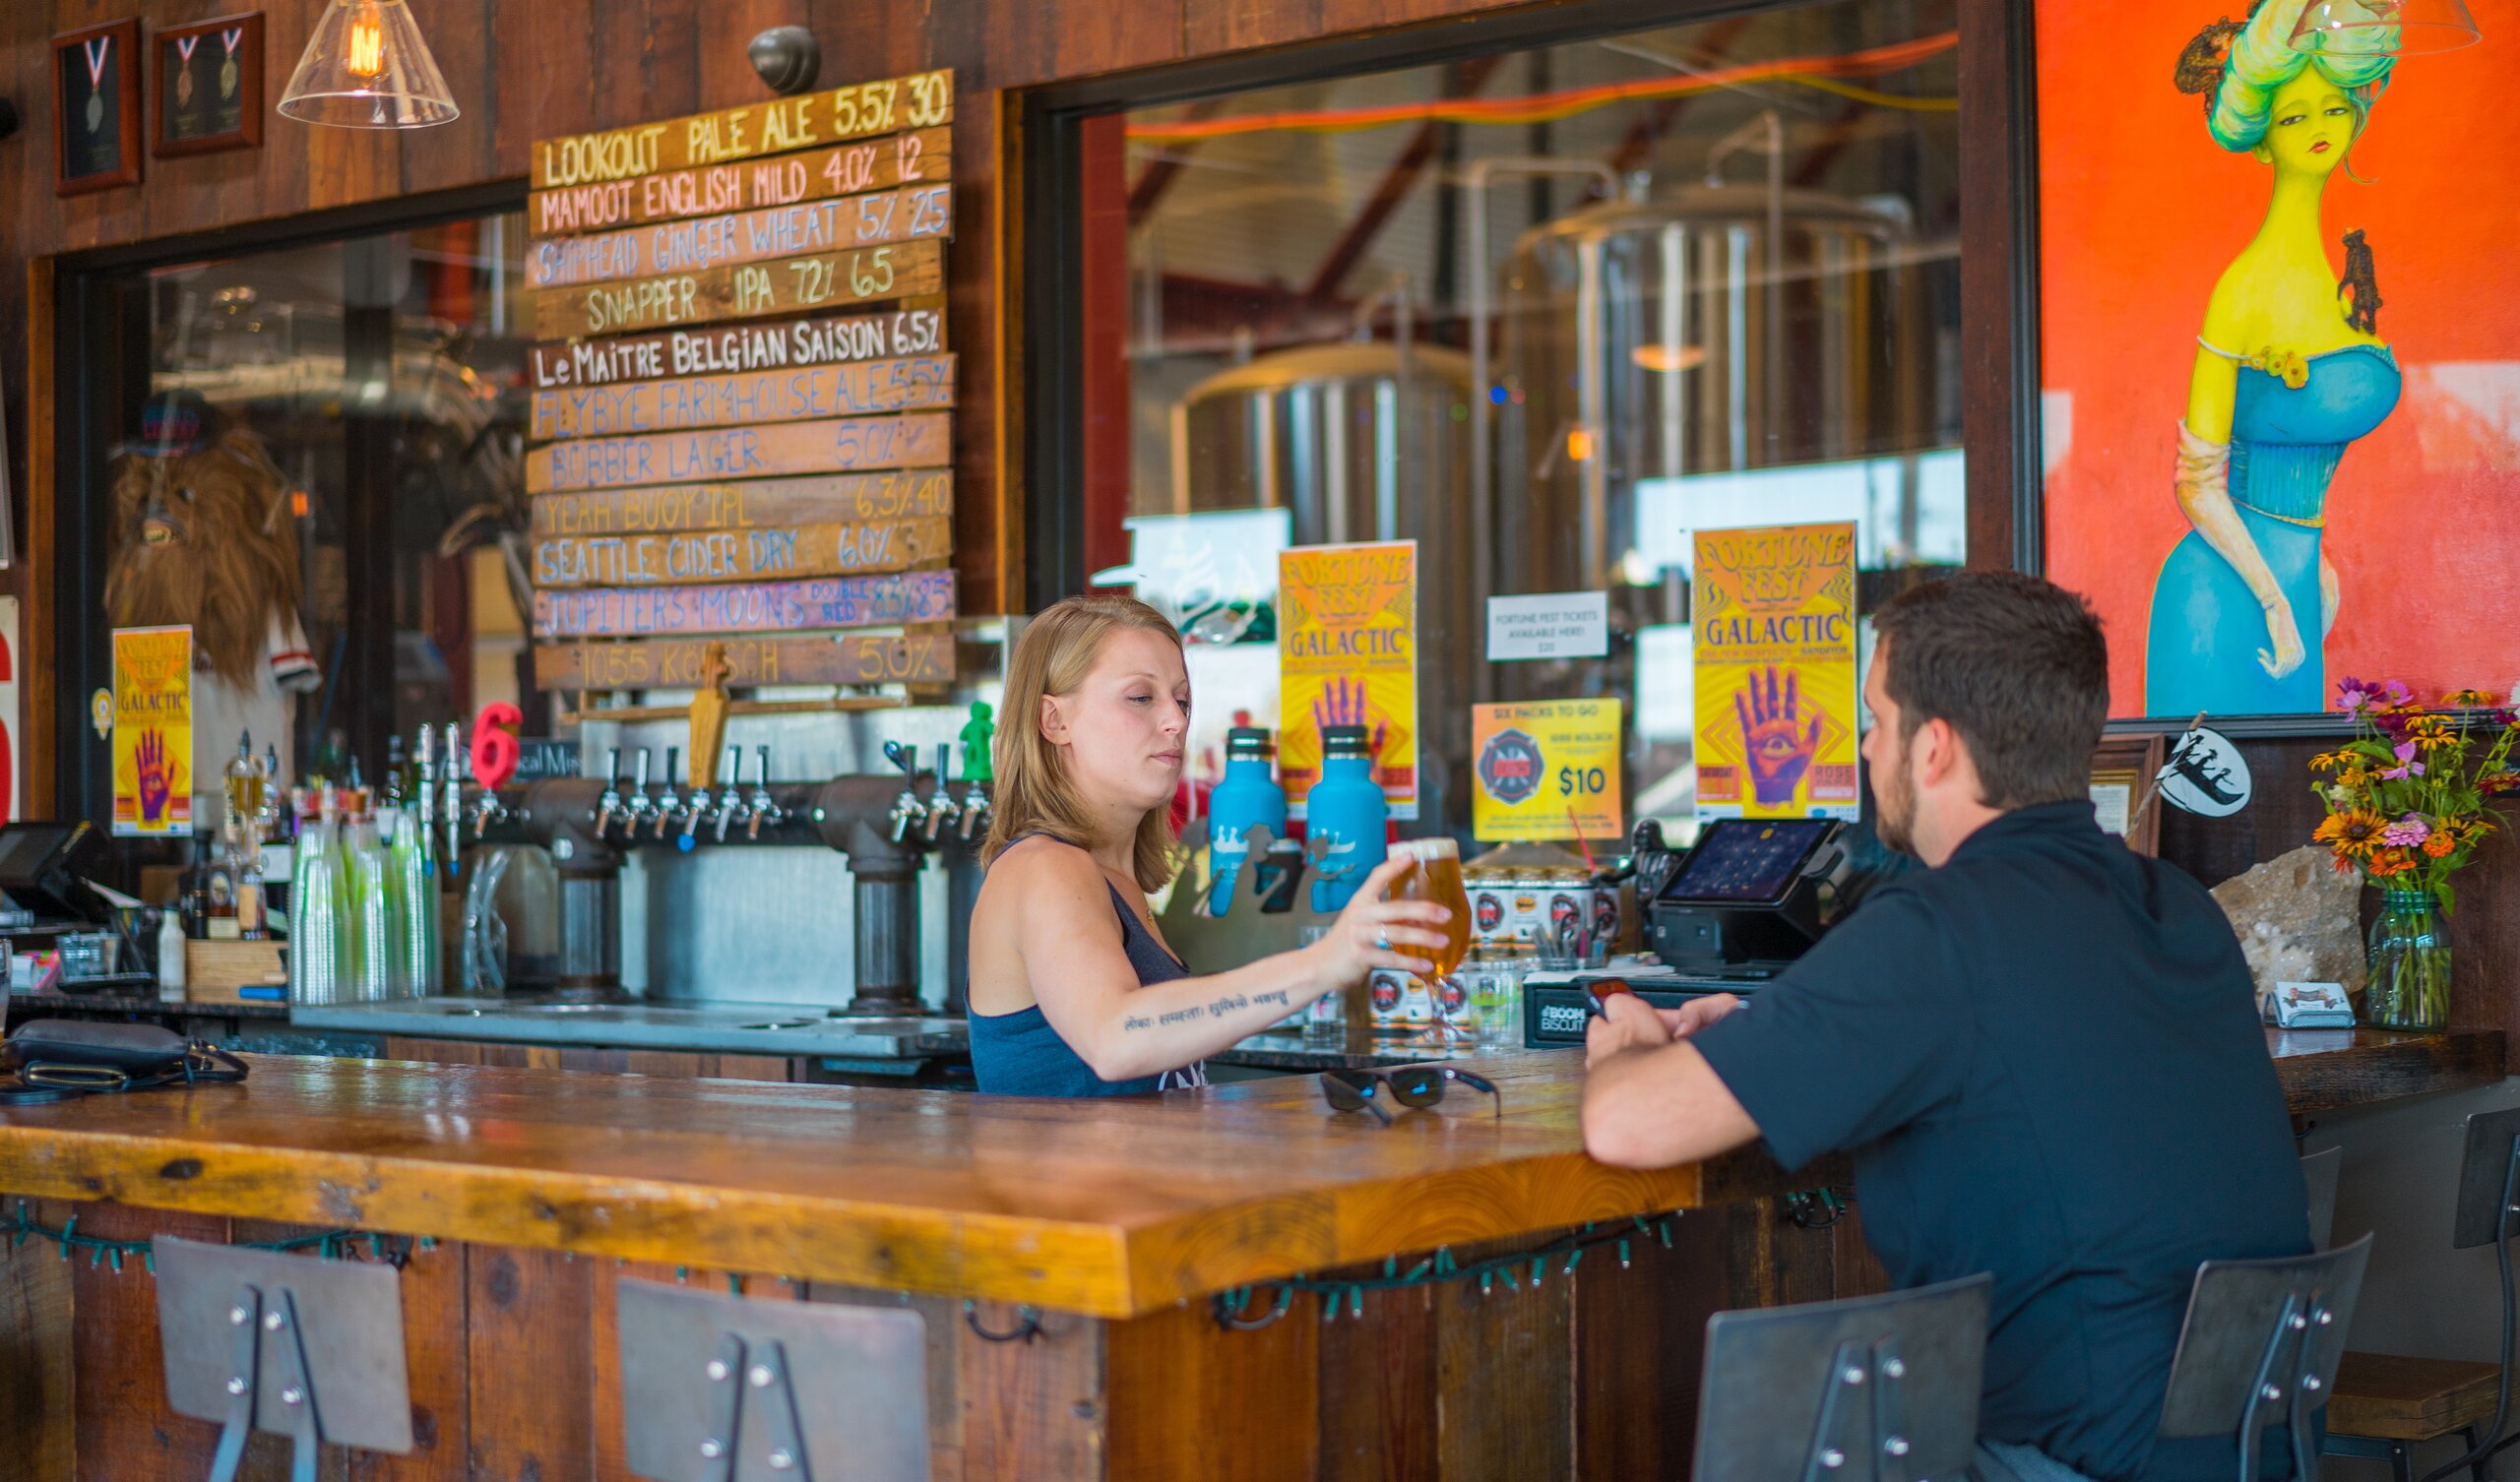 Waitress serving a beer to a man at the Minglewood Brewery located in Southeast Missouri